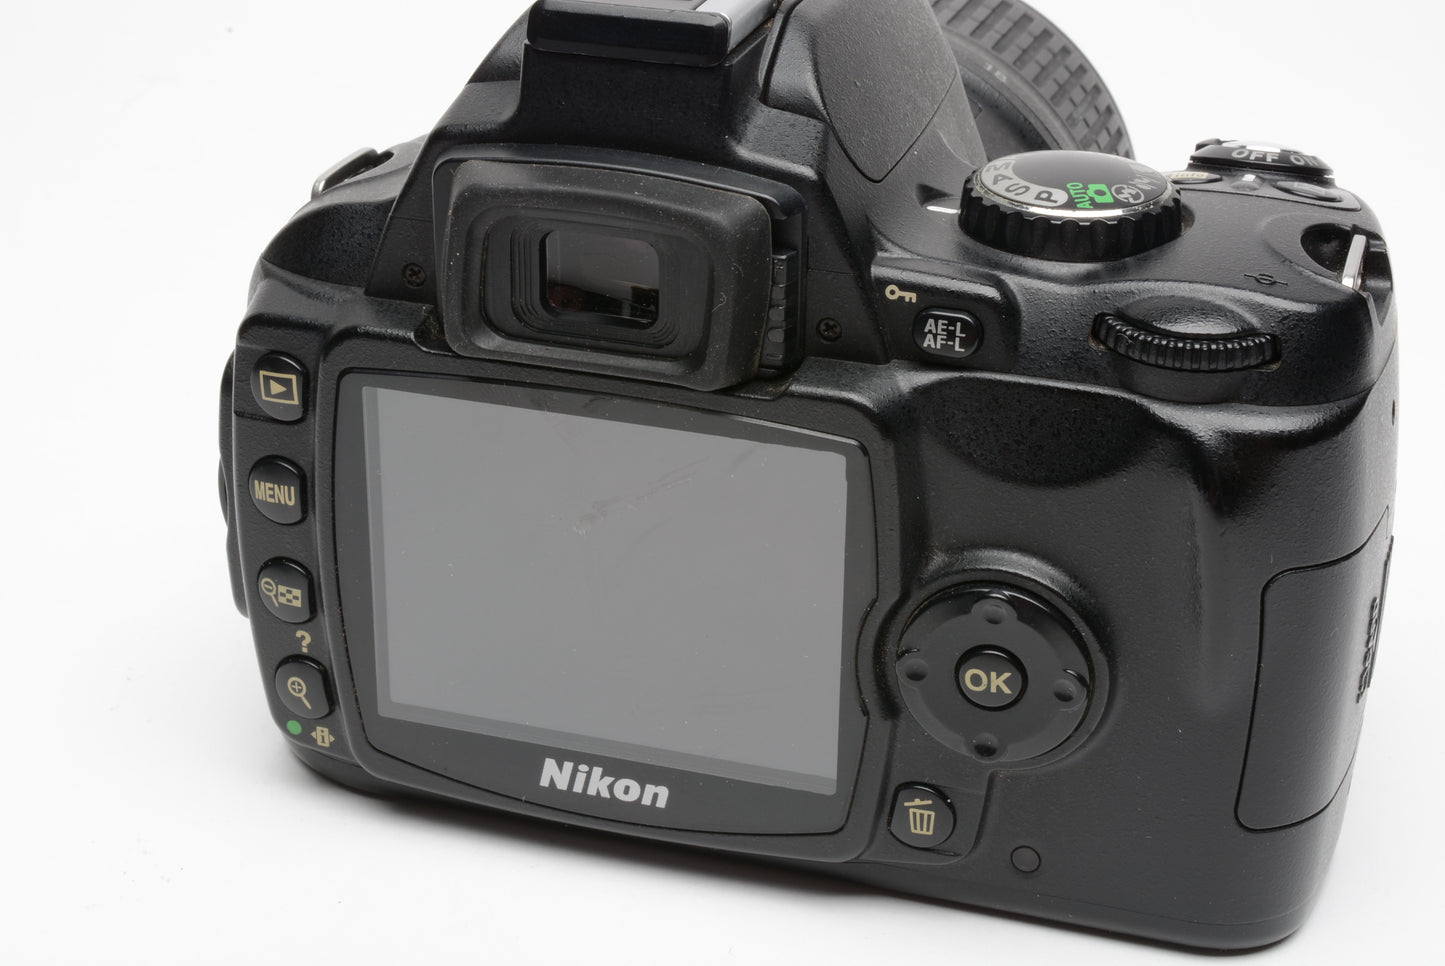 Nikon D40X body w/Nikkor 18-55mm f3.5-5.6 G VR II, 2batts, charger, Only 7833 acts!